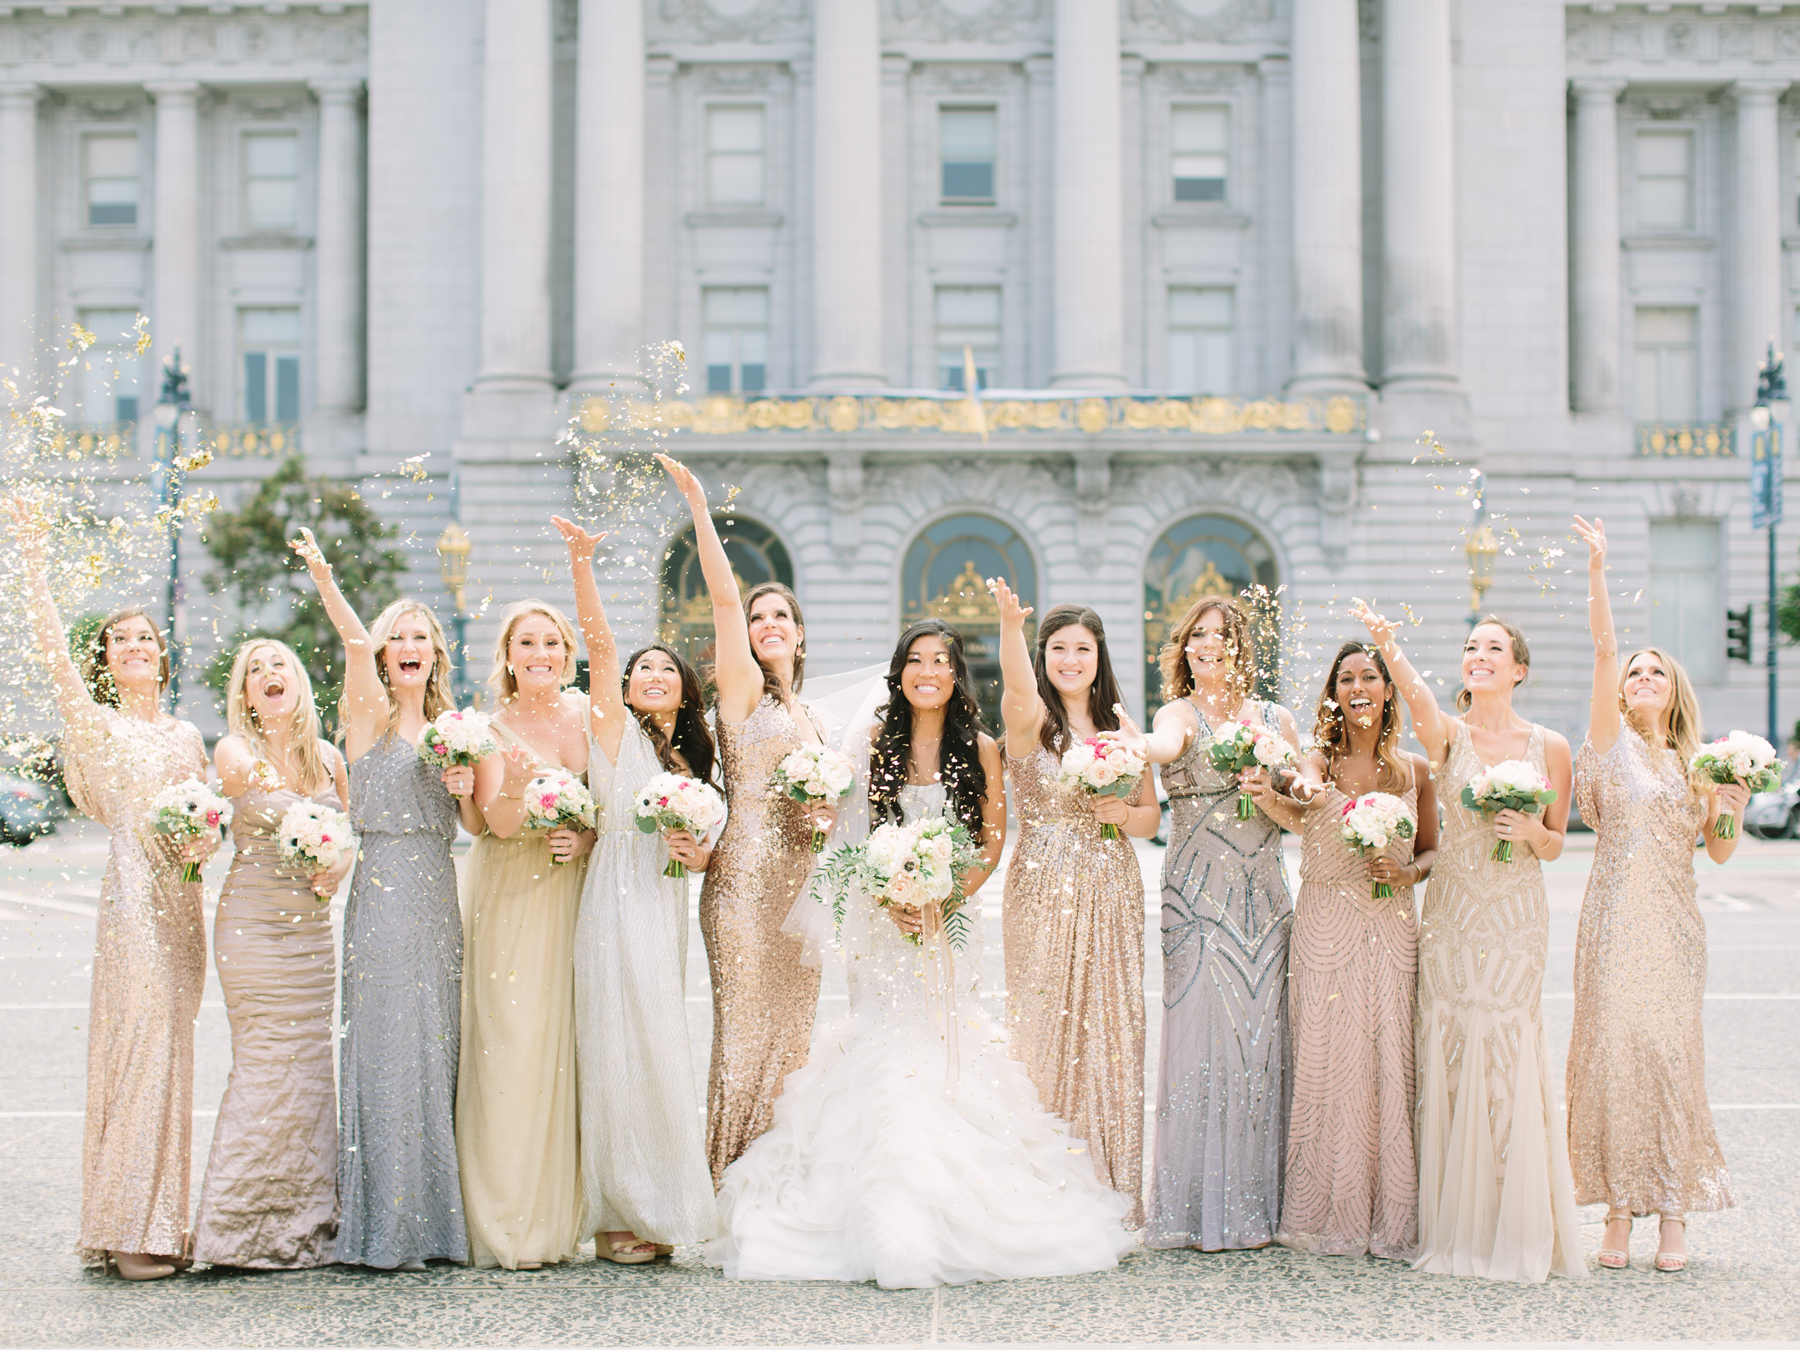 mismatched bridesmaid dresses in neutral colors